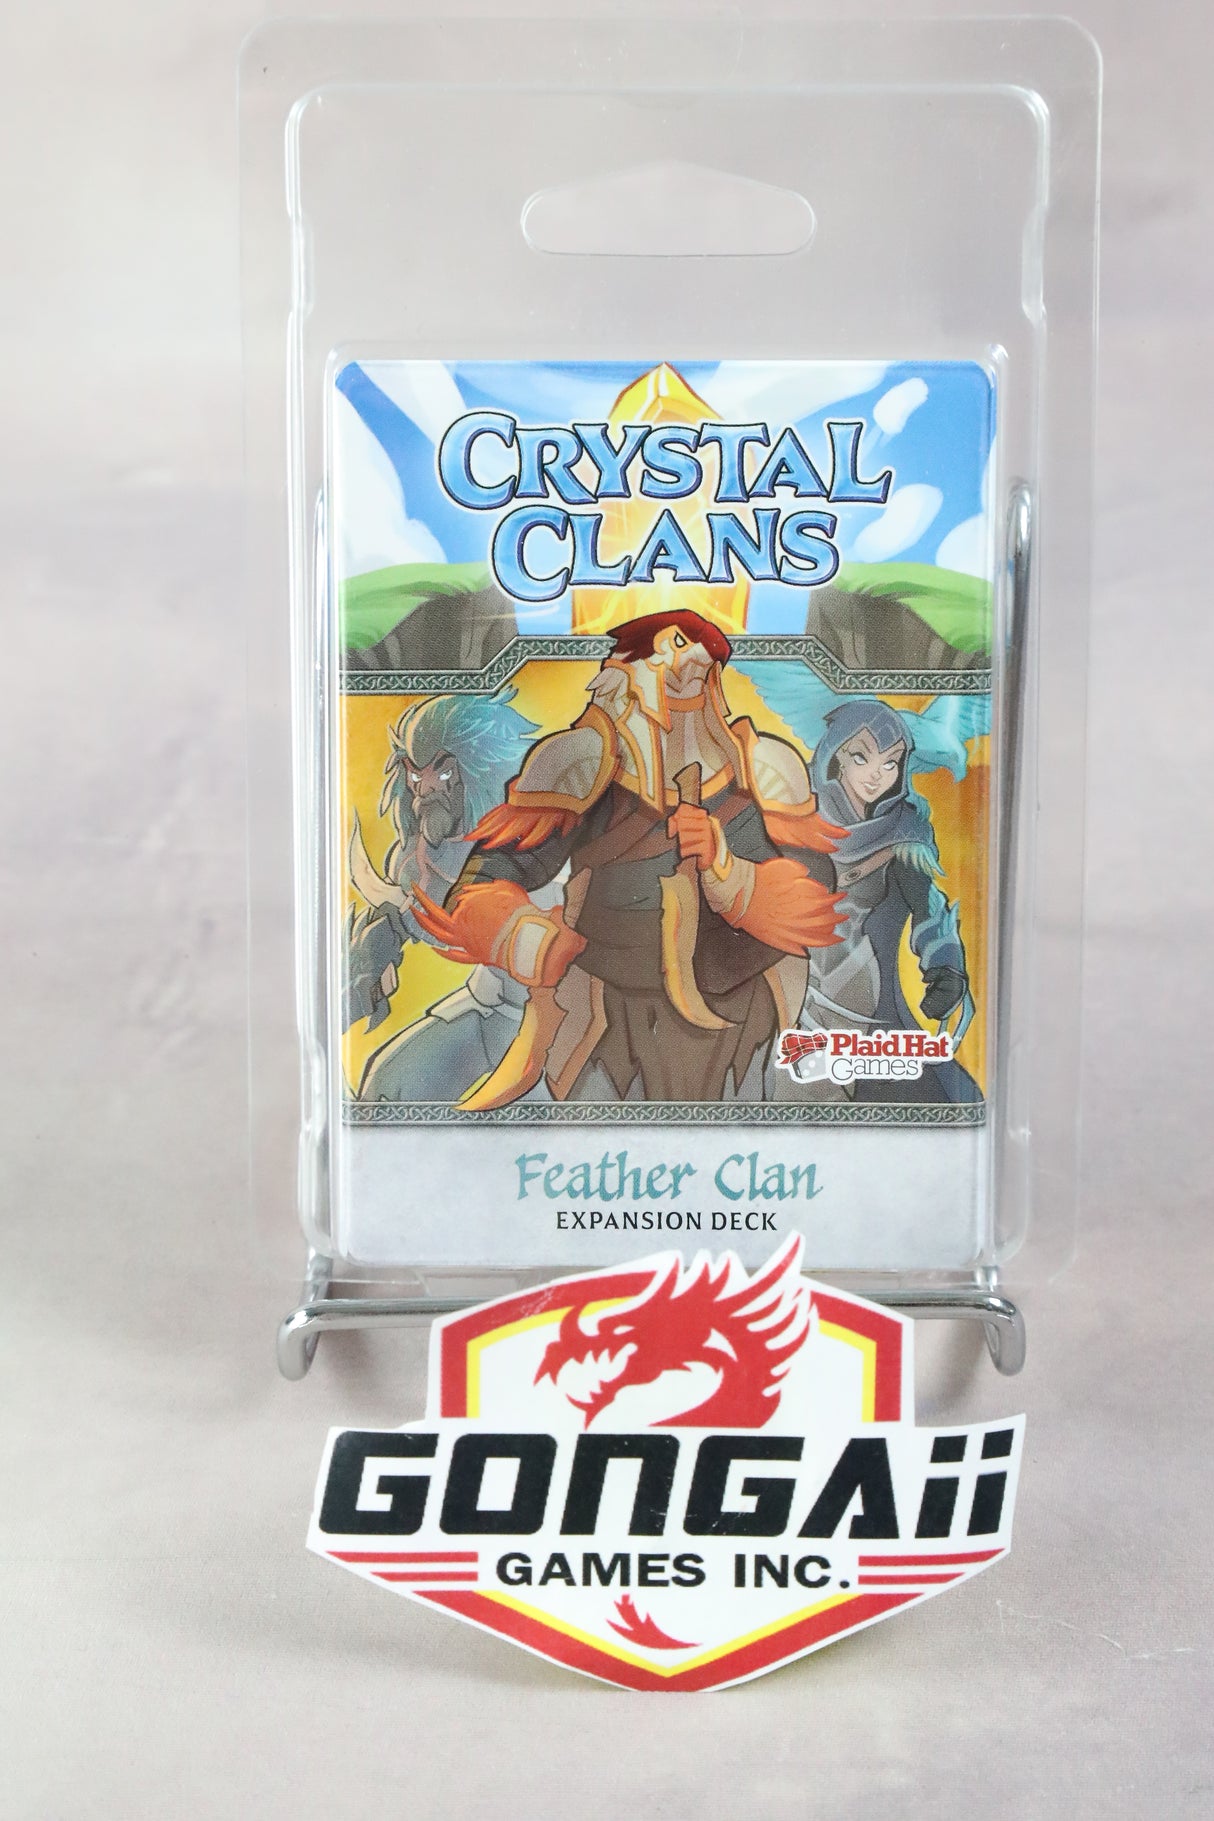 Crystal Clans: Feather Clan Expansion Deck